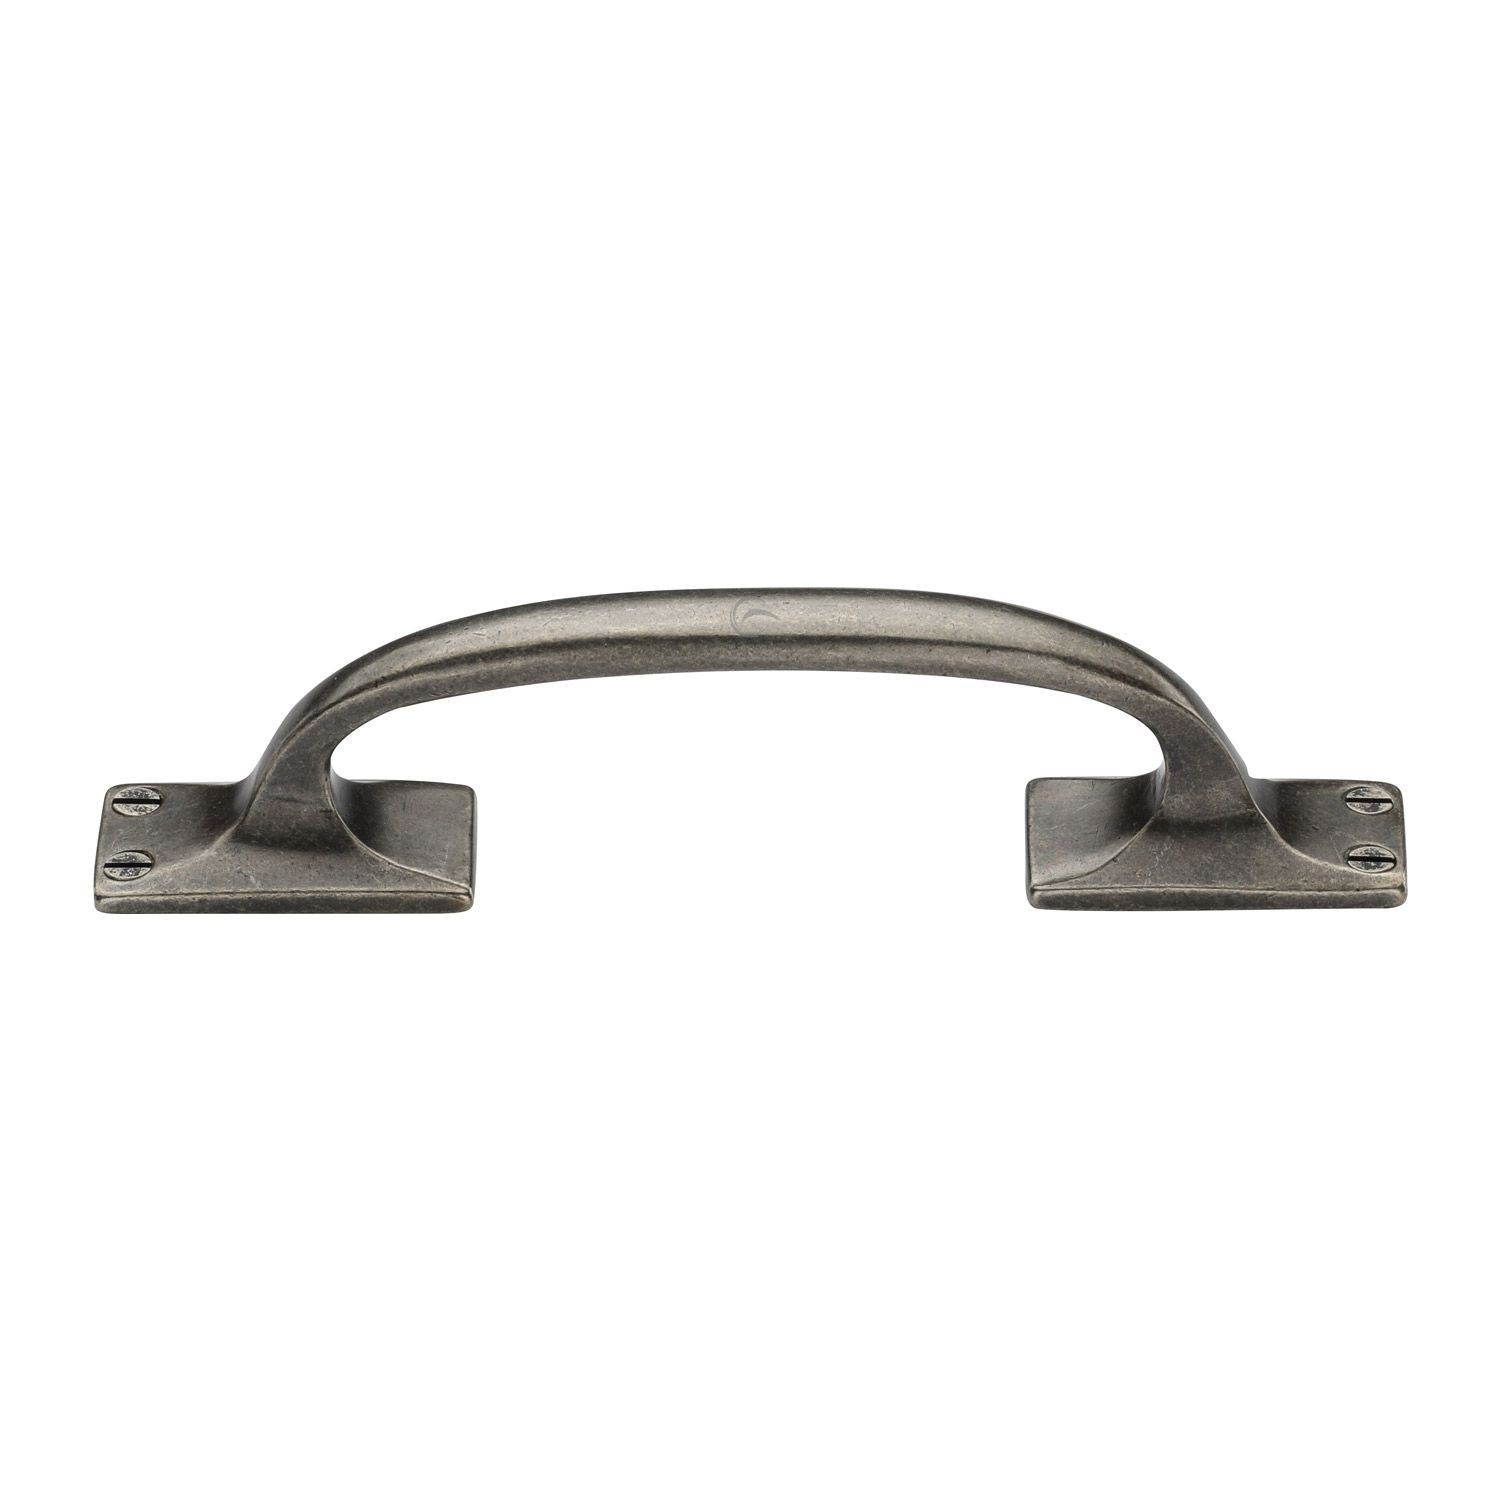 White Bronze Rustic Cabinet Pull Offset Design 159mm